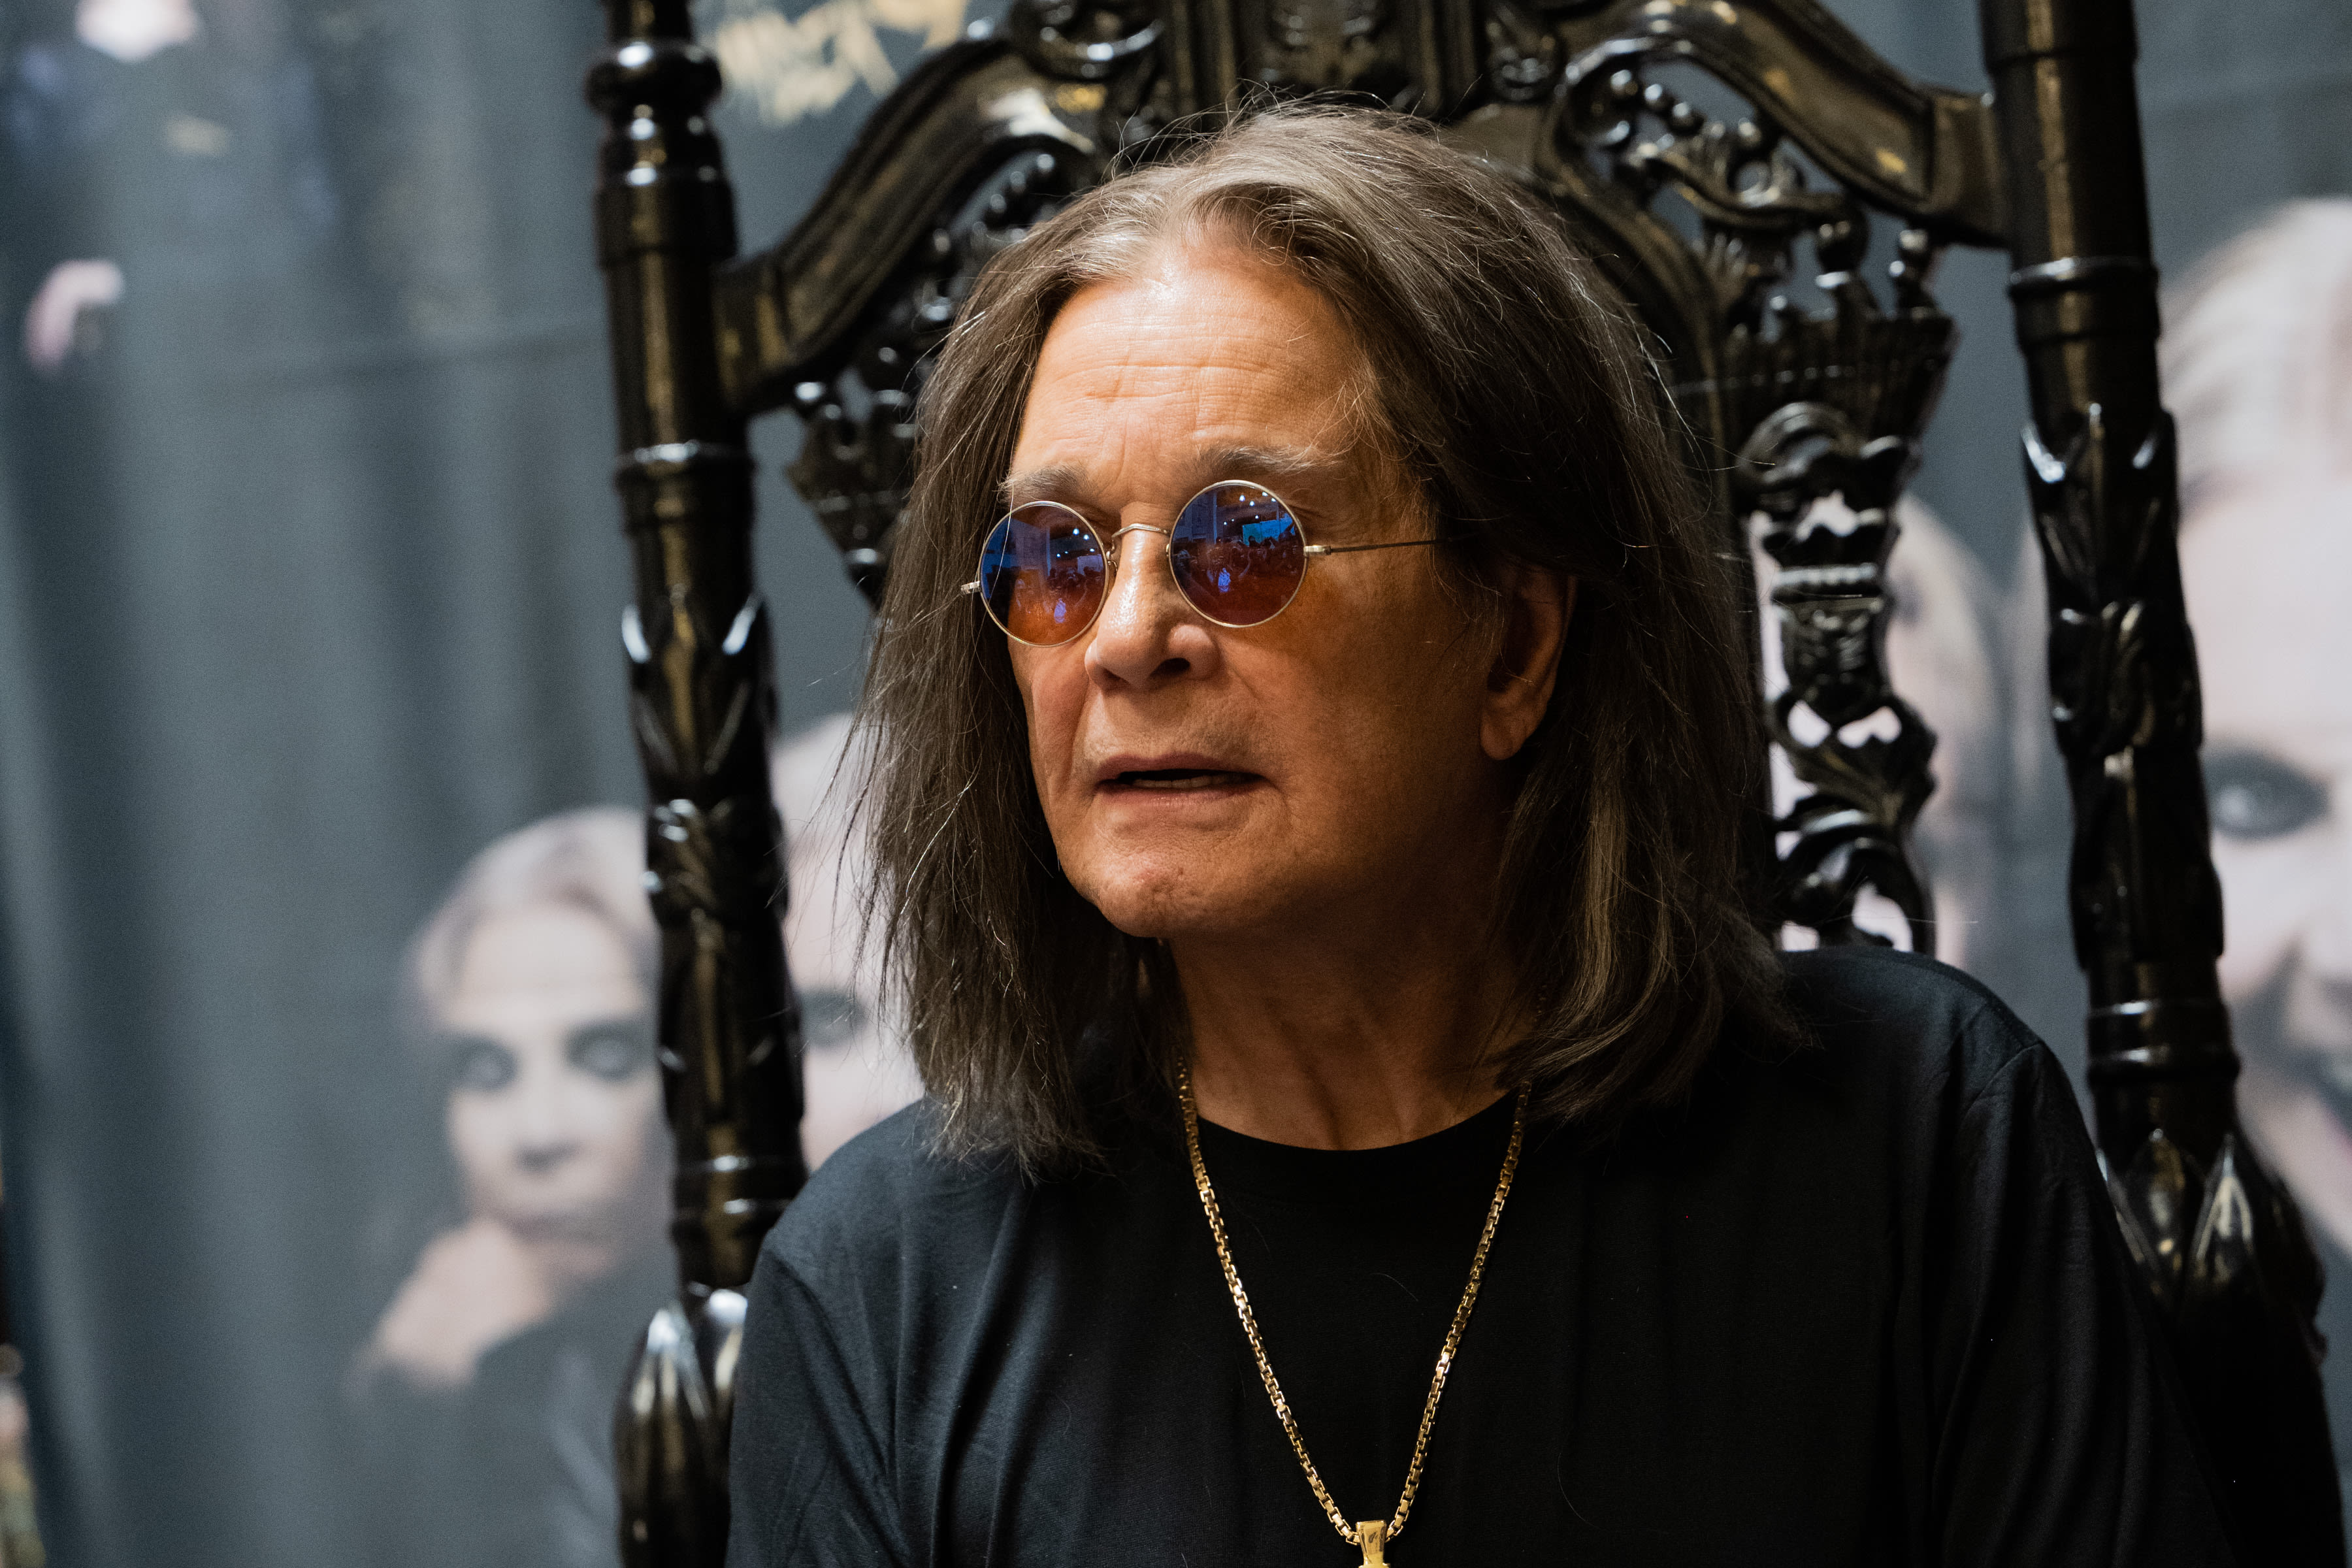 Inside Ozzy Osbourne’s Health Woes: ‘Things Have Taken a Turn for the Worse’